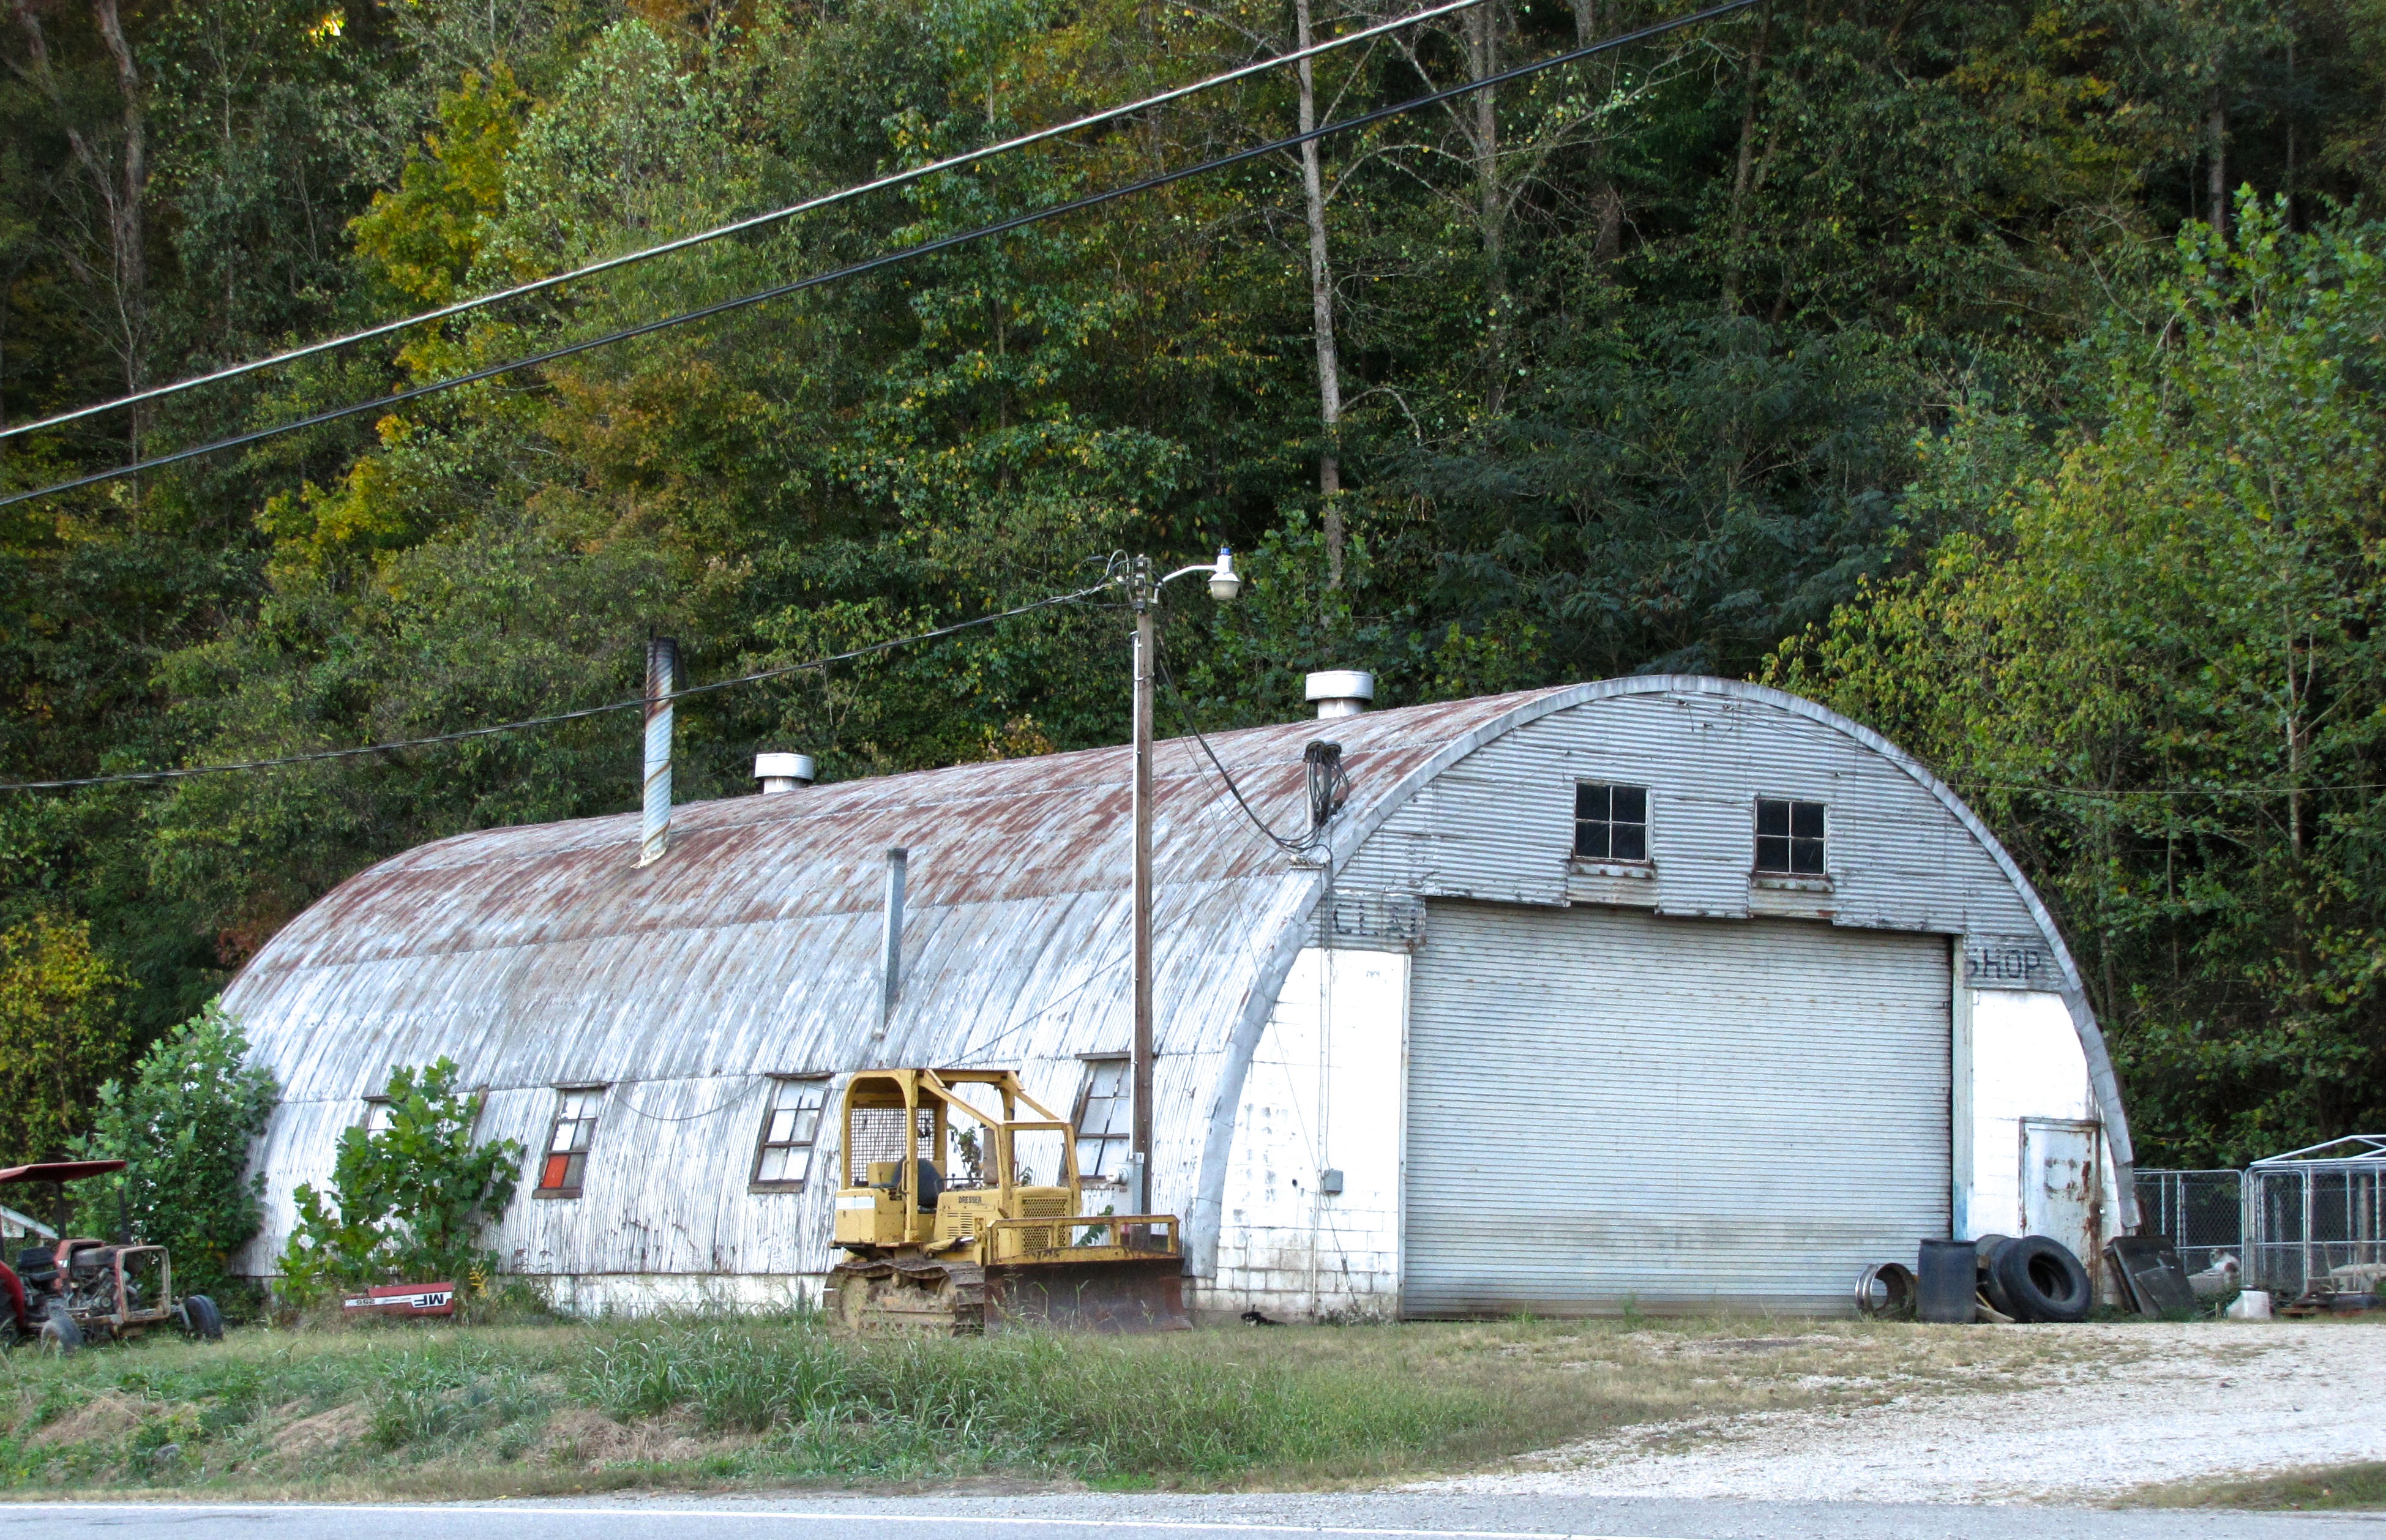 quonset hut in Scarbro, WV